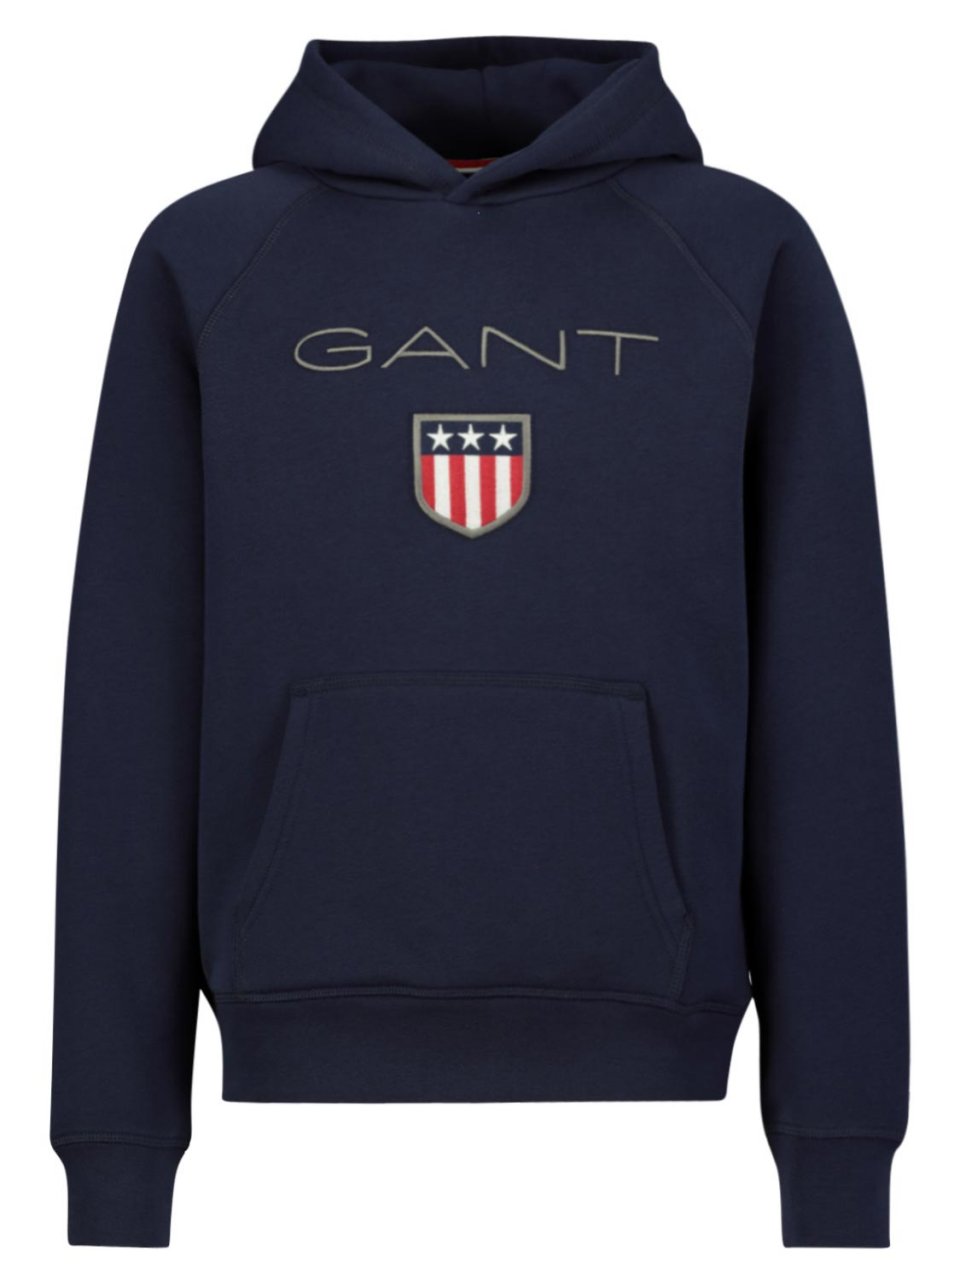 GANT KIDS AND TEEN CLOTHING 906652 NAVY SHIELD HOODIE APPLIQ BRANDED DETAIL 9/10,11/12.13/14.15& 16YRS ONLY 